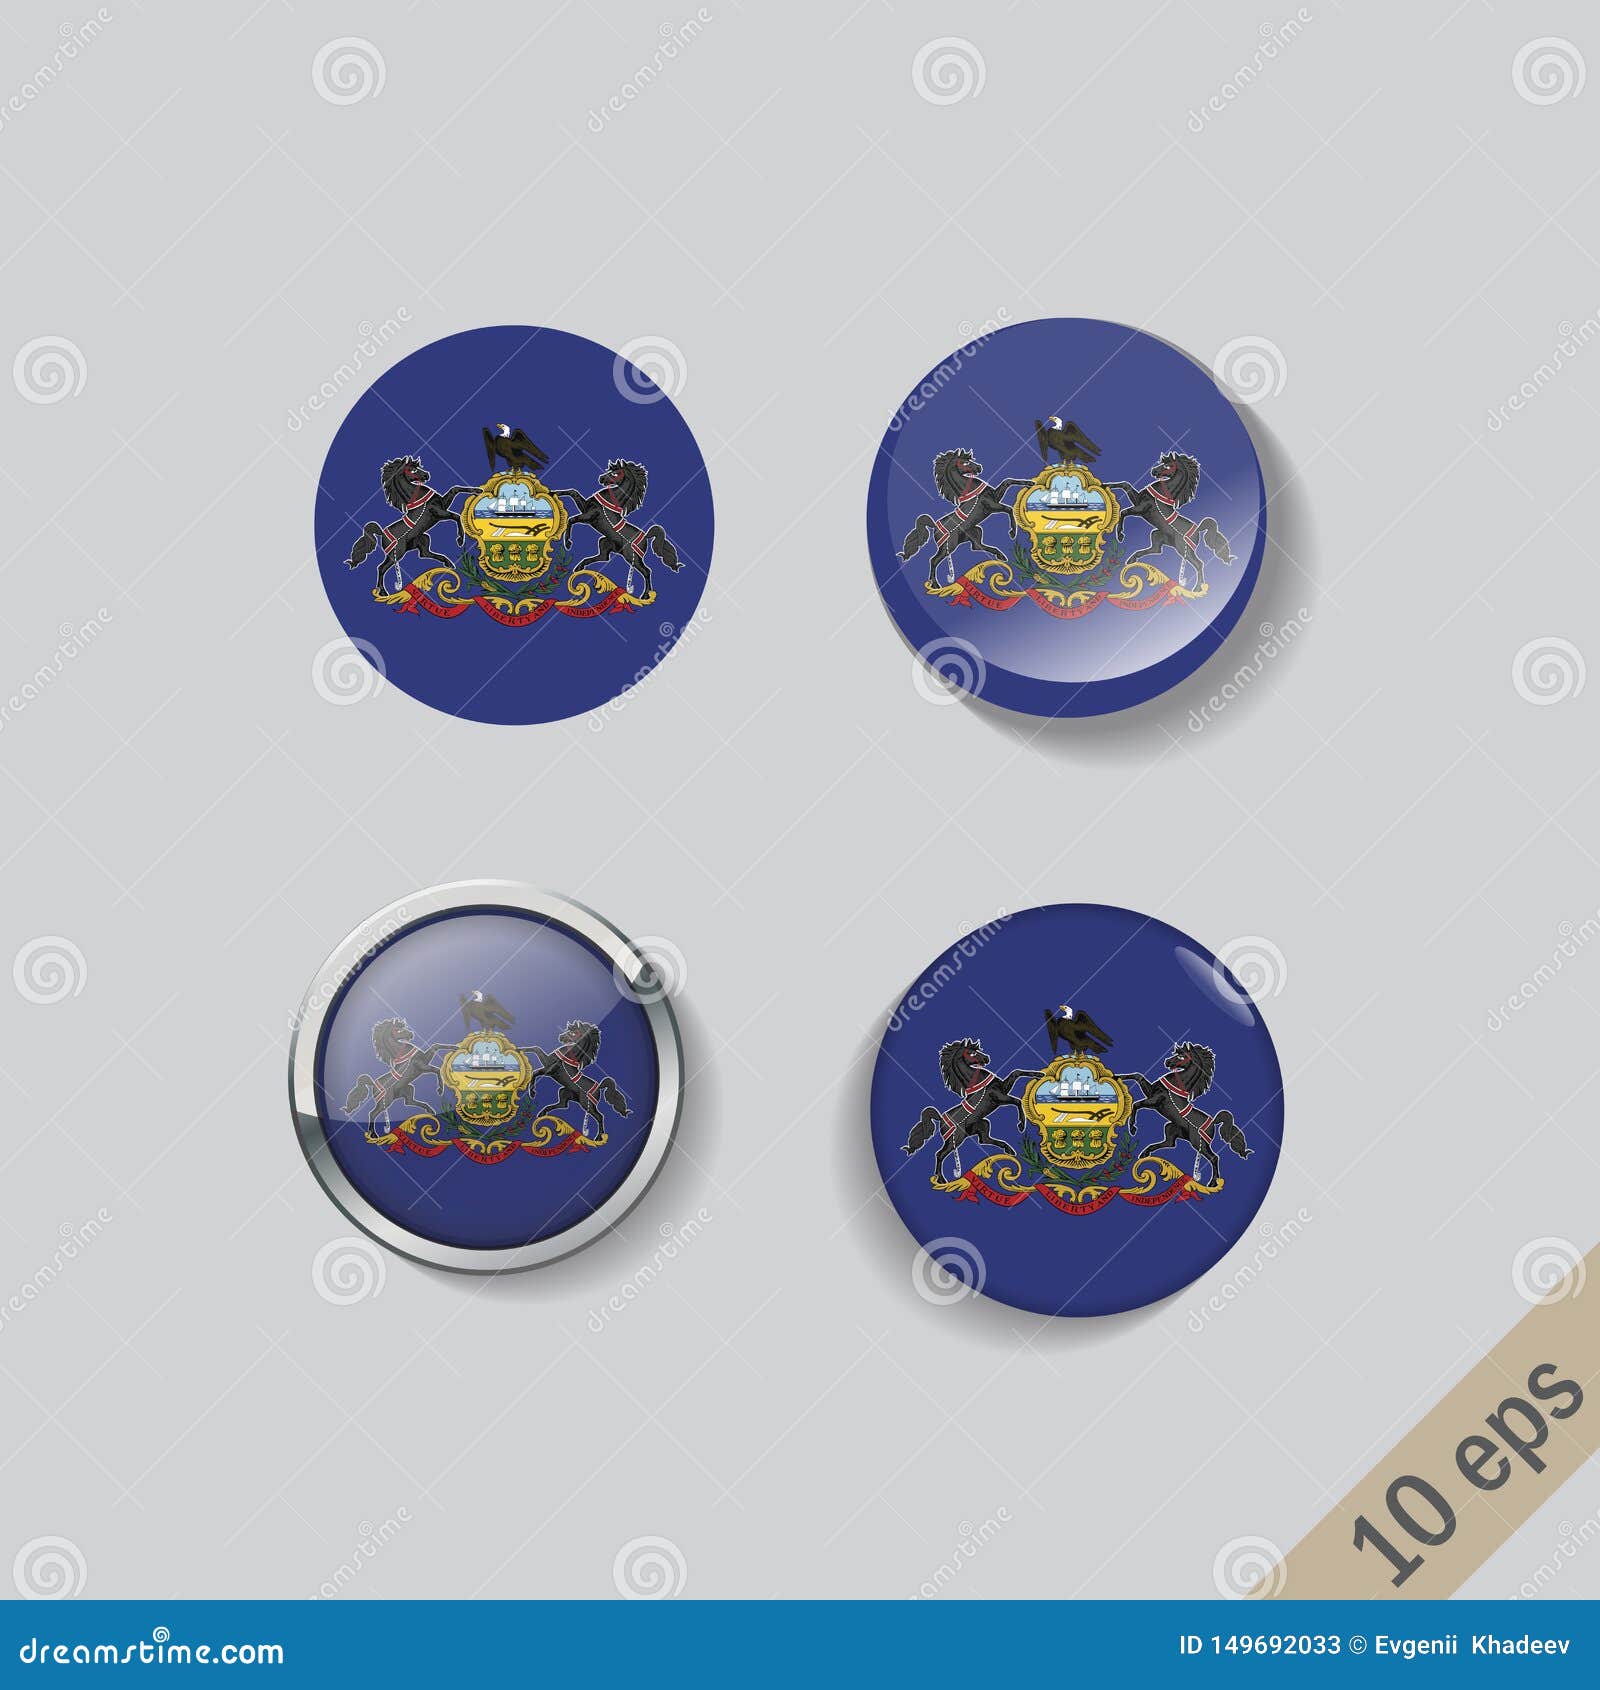 set of round buttons with the image of pensilvania state flag on gray background with shadow